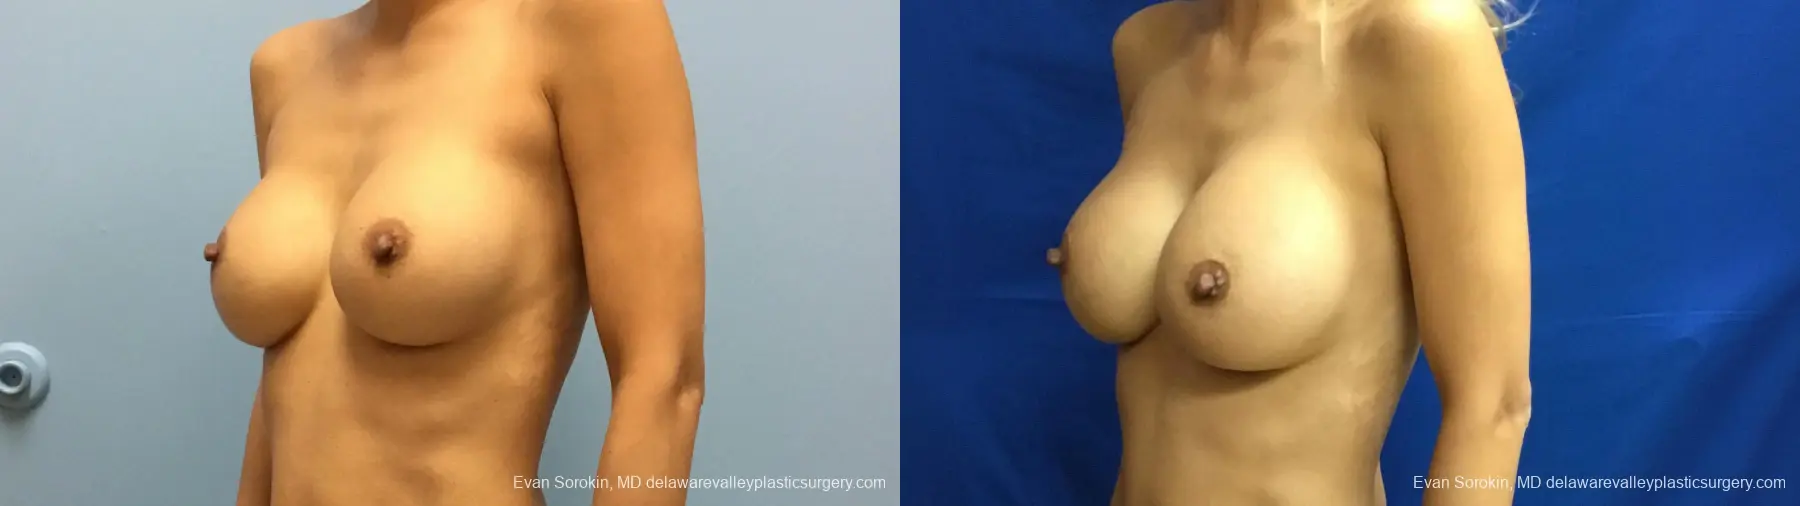 Philadelphia Breast Augmentation 13178 - Before and After 4